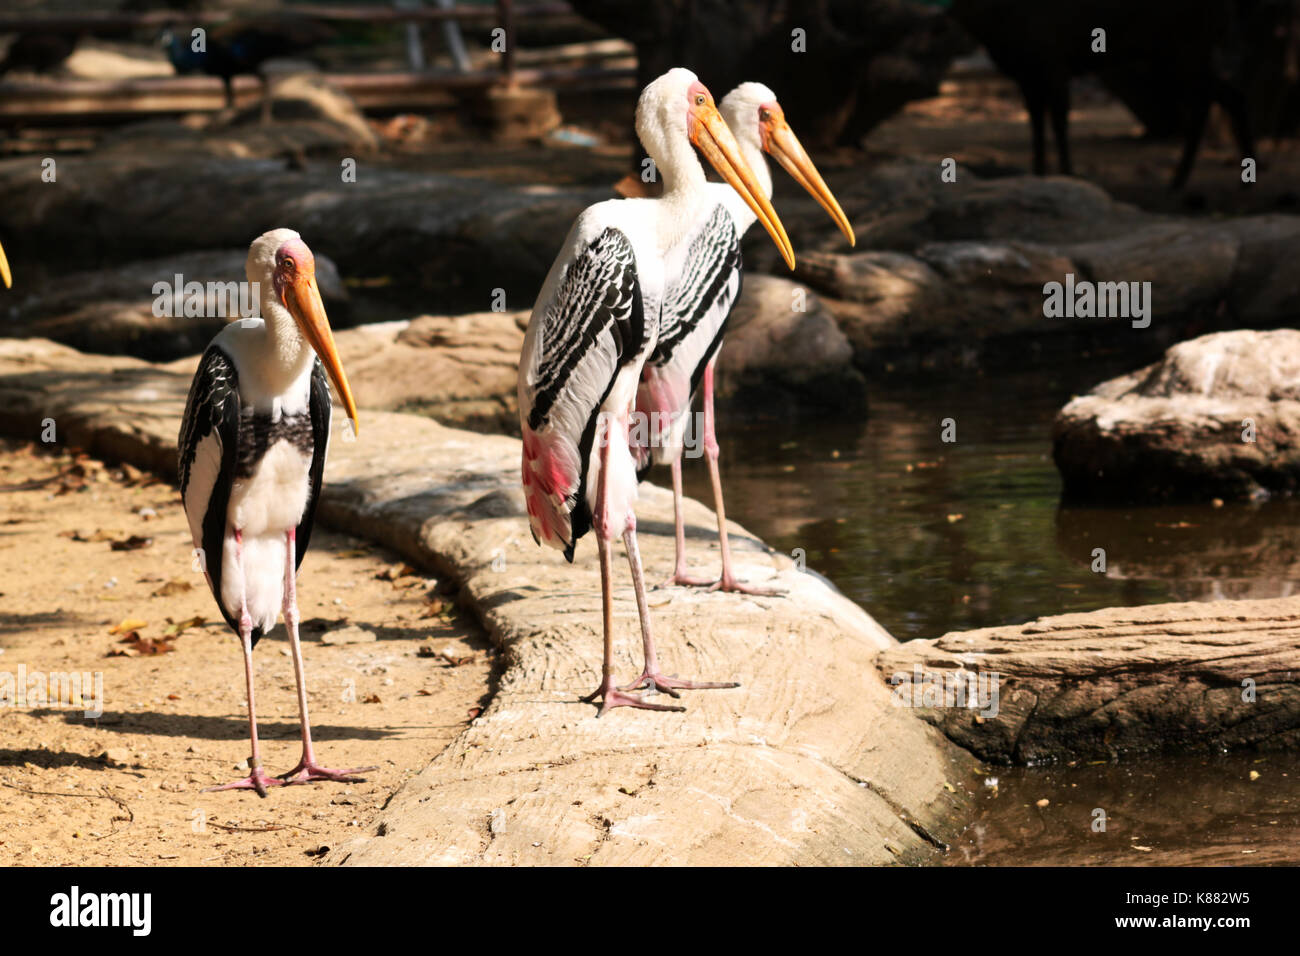 Painted Stork (Mycteria leucocephala) is a large wading bird in the stork family Stock Photo